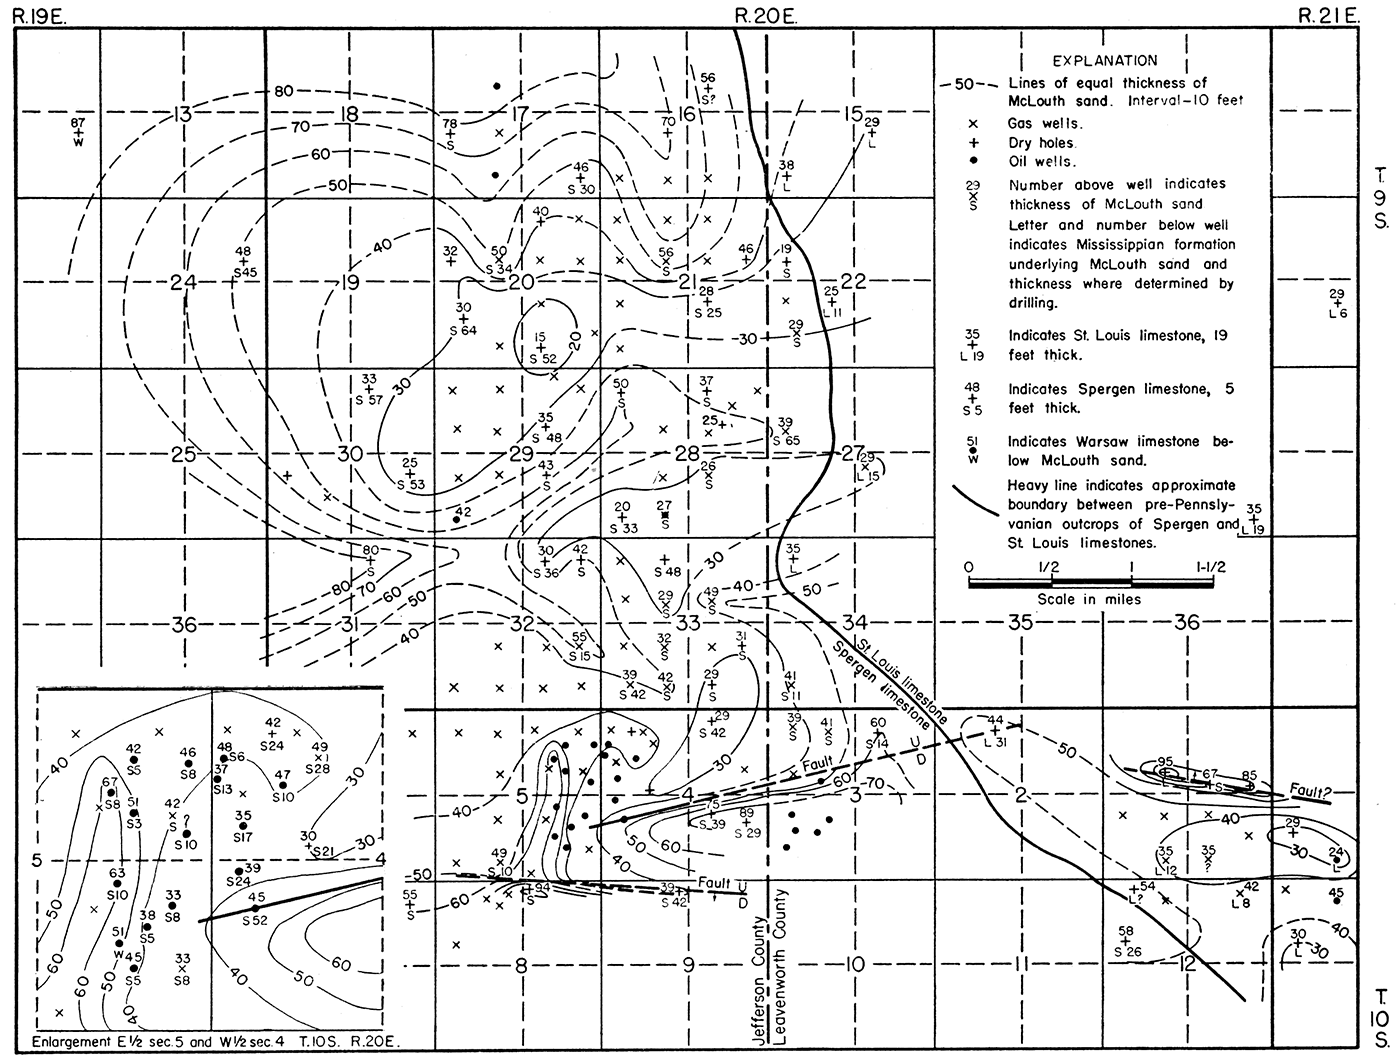 Map of McLouth field showing variations in thickness of the McLouth sand by lines of equal thickness and the thickness of the underlying Mississippian formations where determined by drilling.